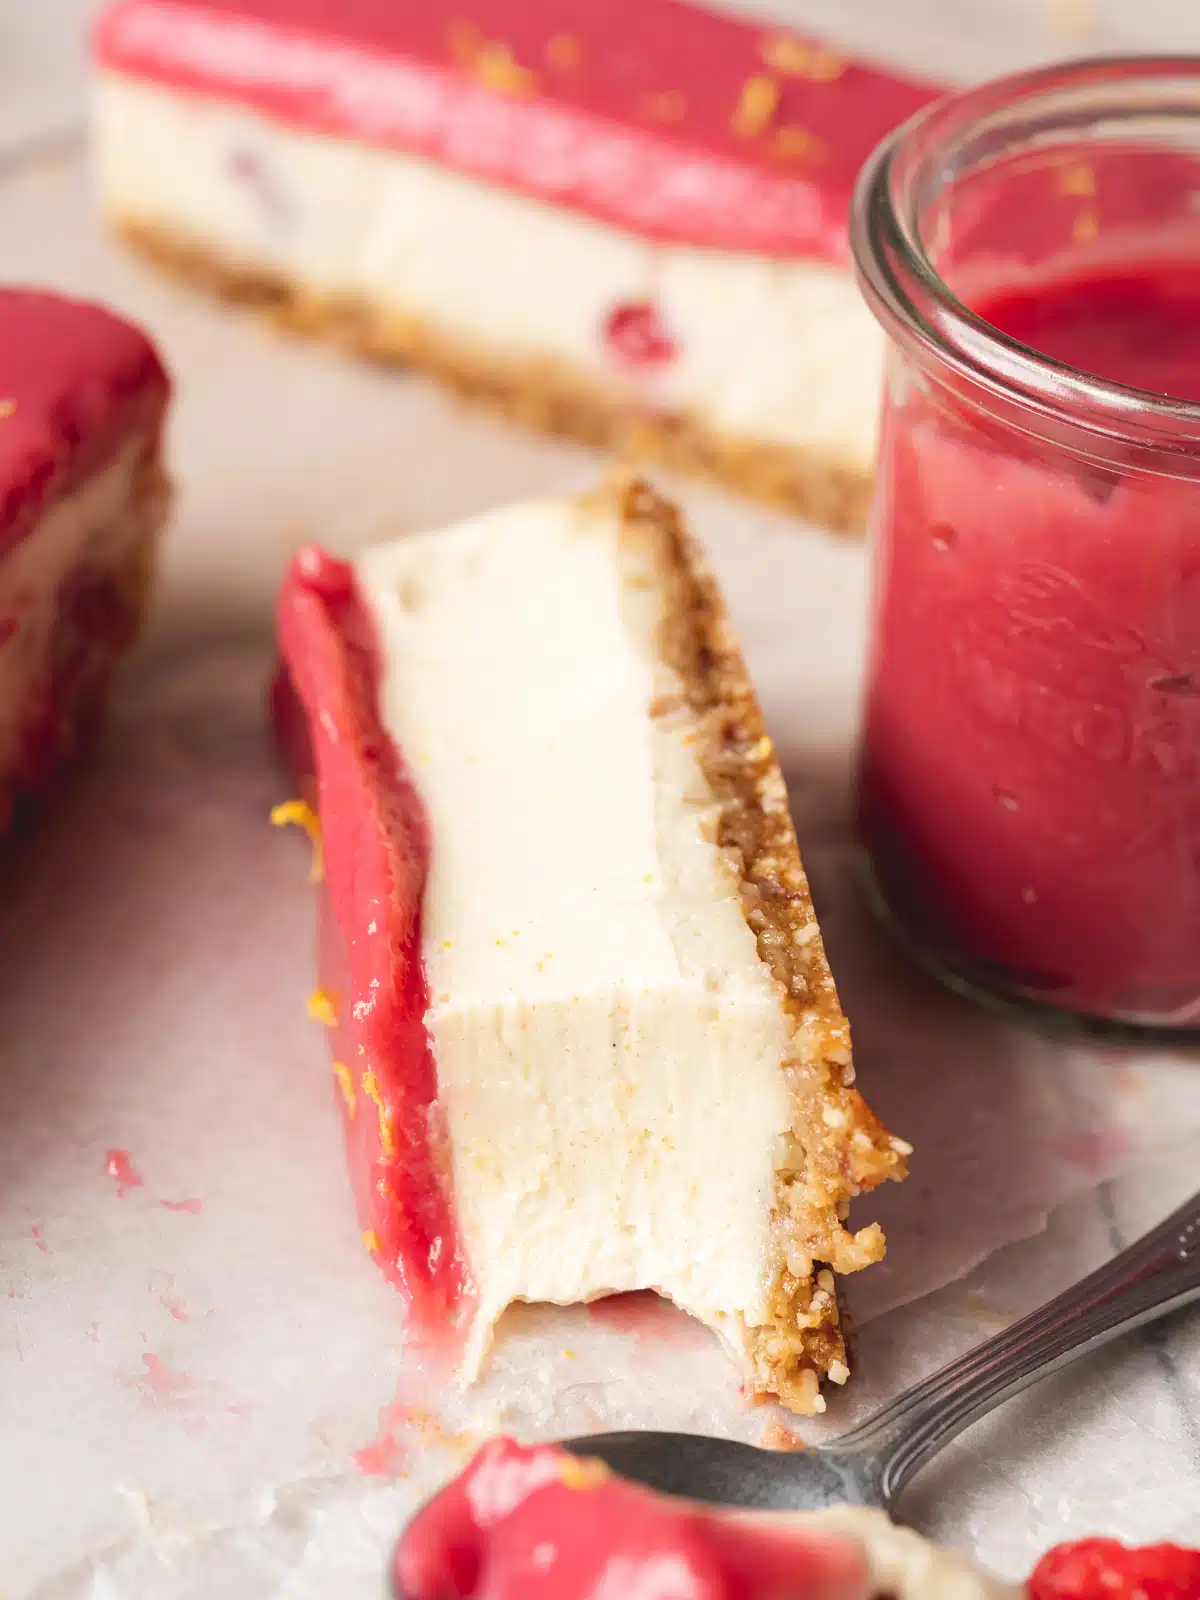 a slice of no bake lemon cheesecake with raspberry curd topping on its side with a spoonful taken showing the creamy consistency.